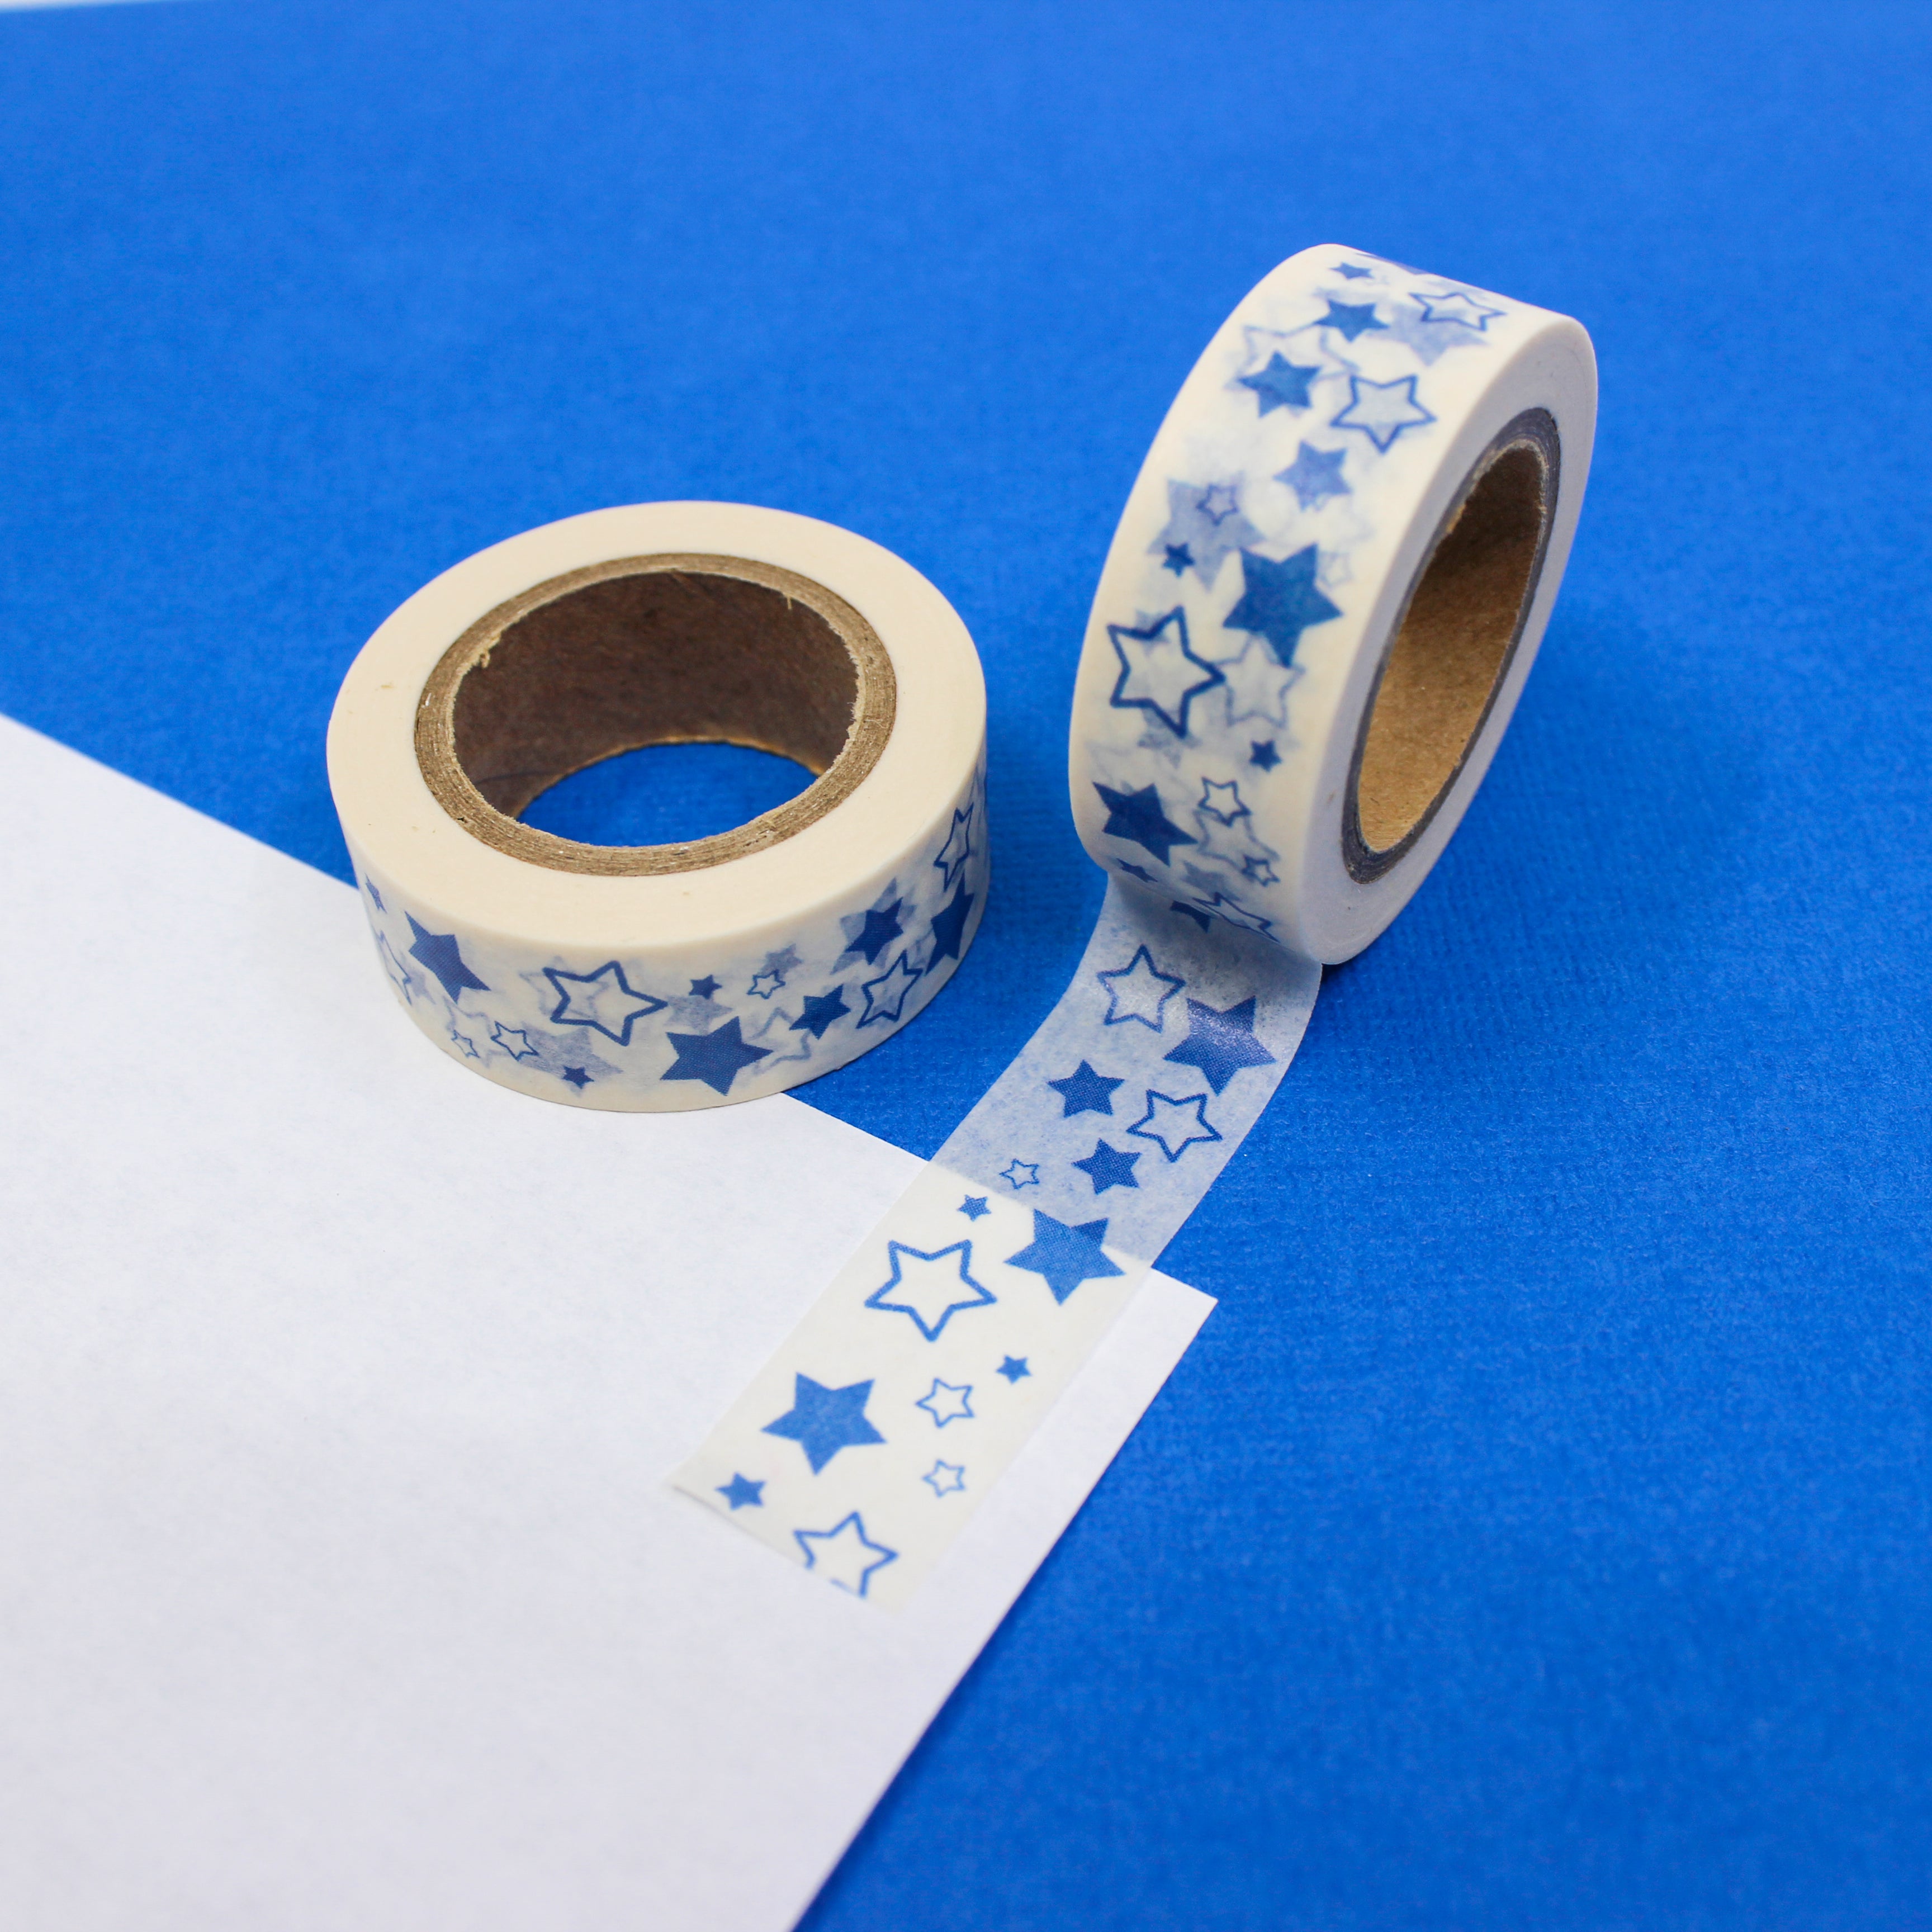 This is a blue and white star pattern washi tape from BBB Supplies Craft Shop